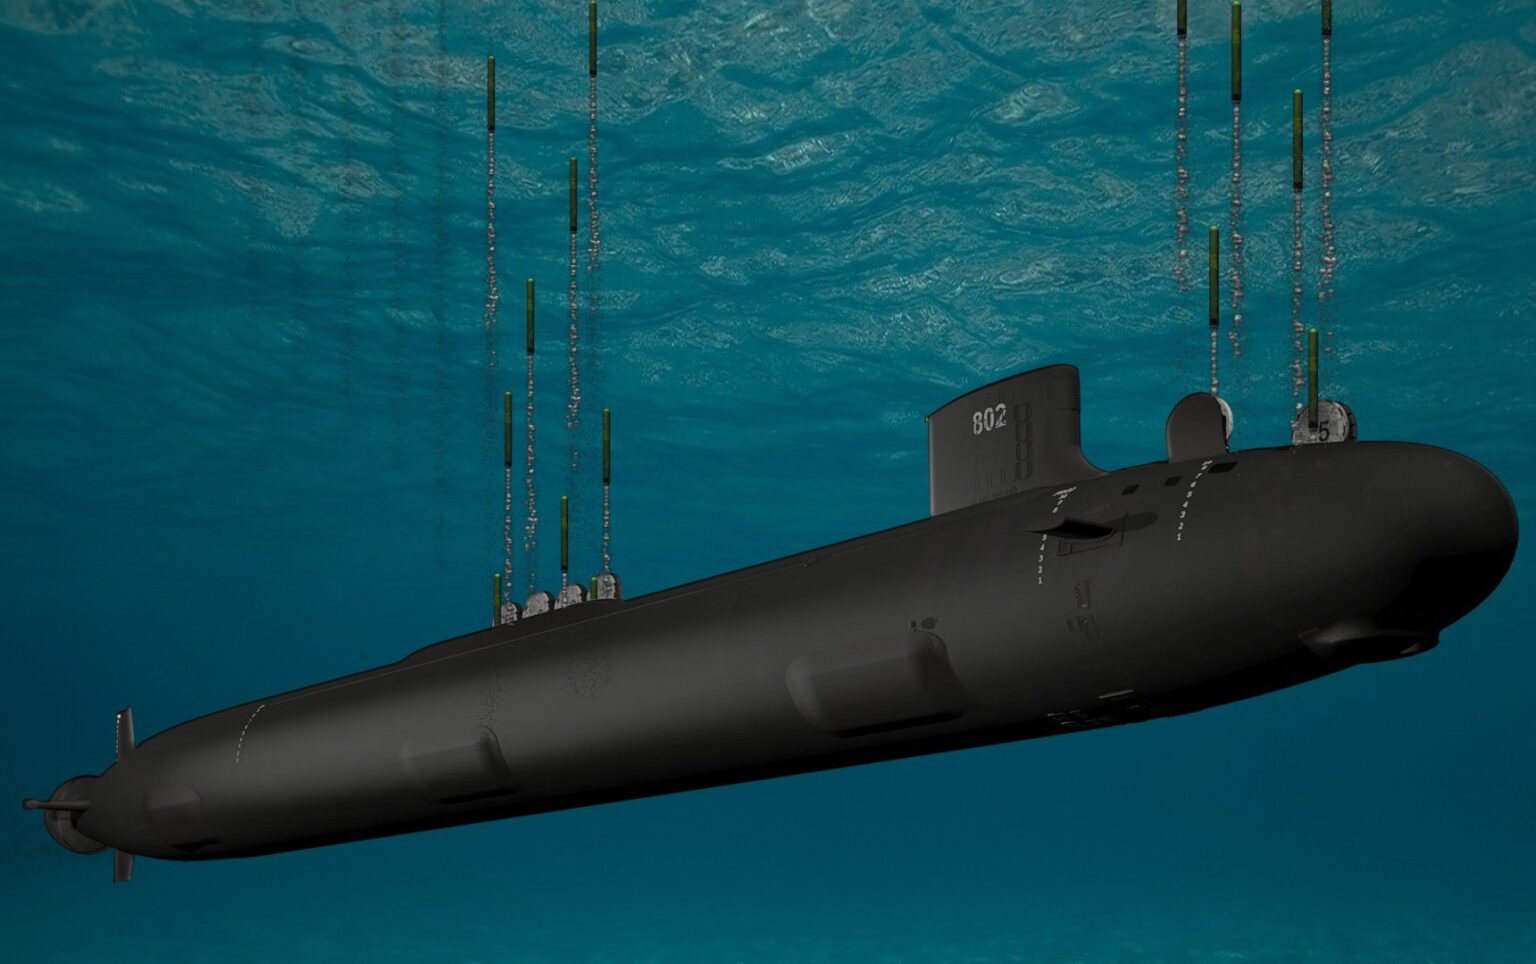 Report to U.S. Congress on Navy Next-Generation Attack Submarine (SSN[X